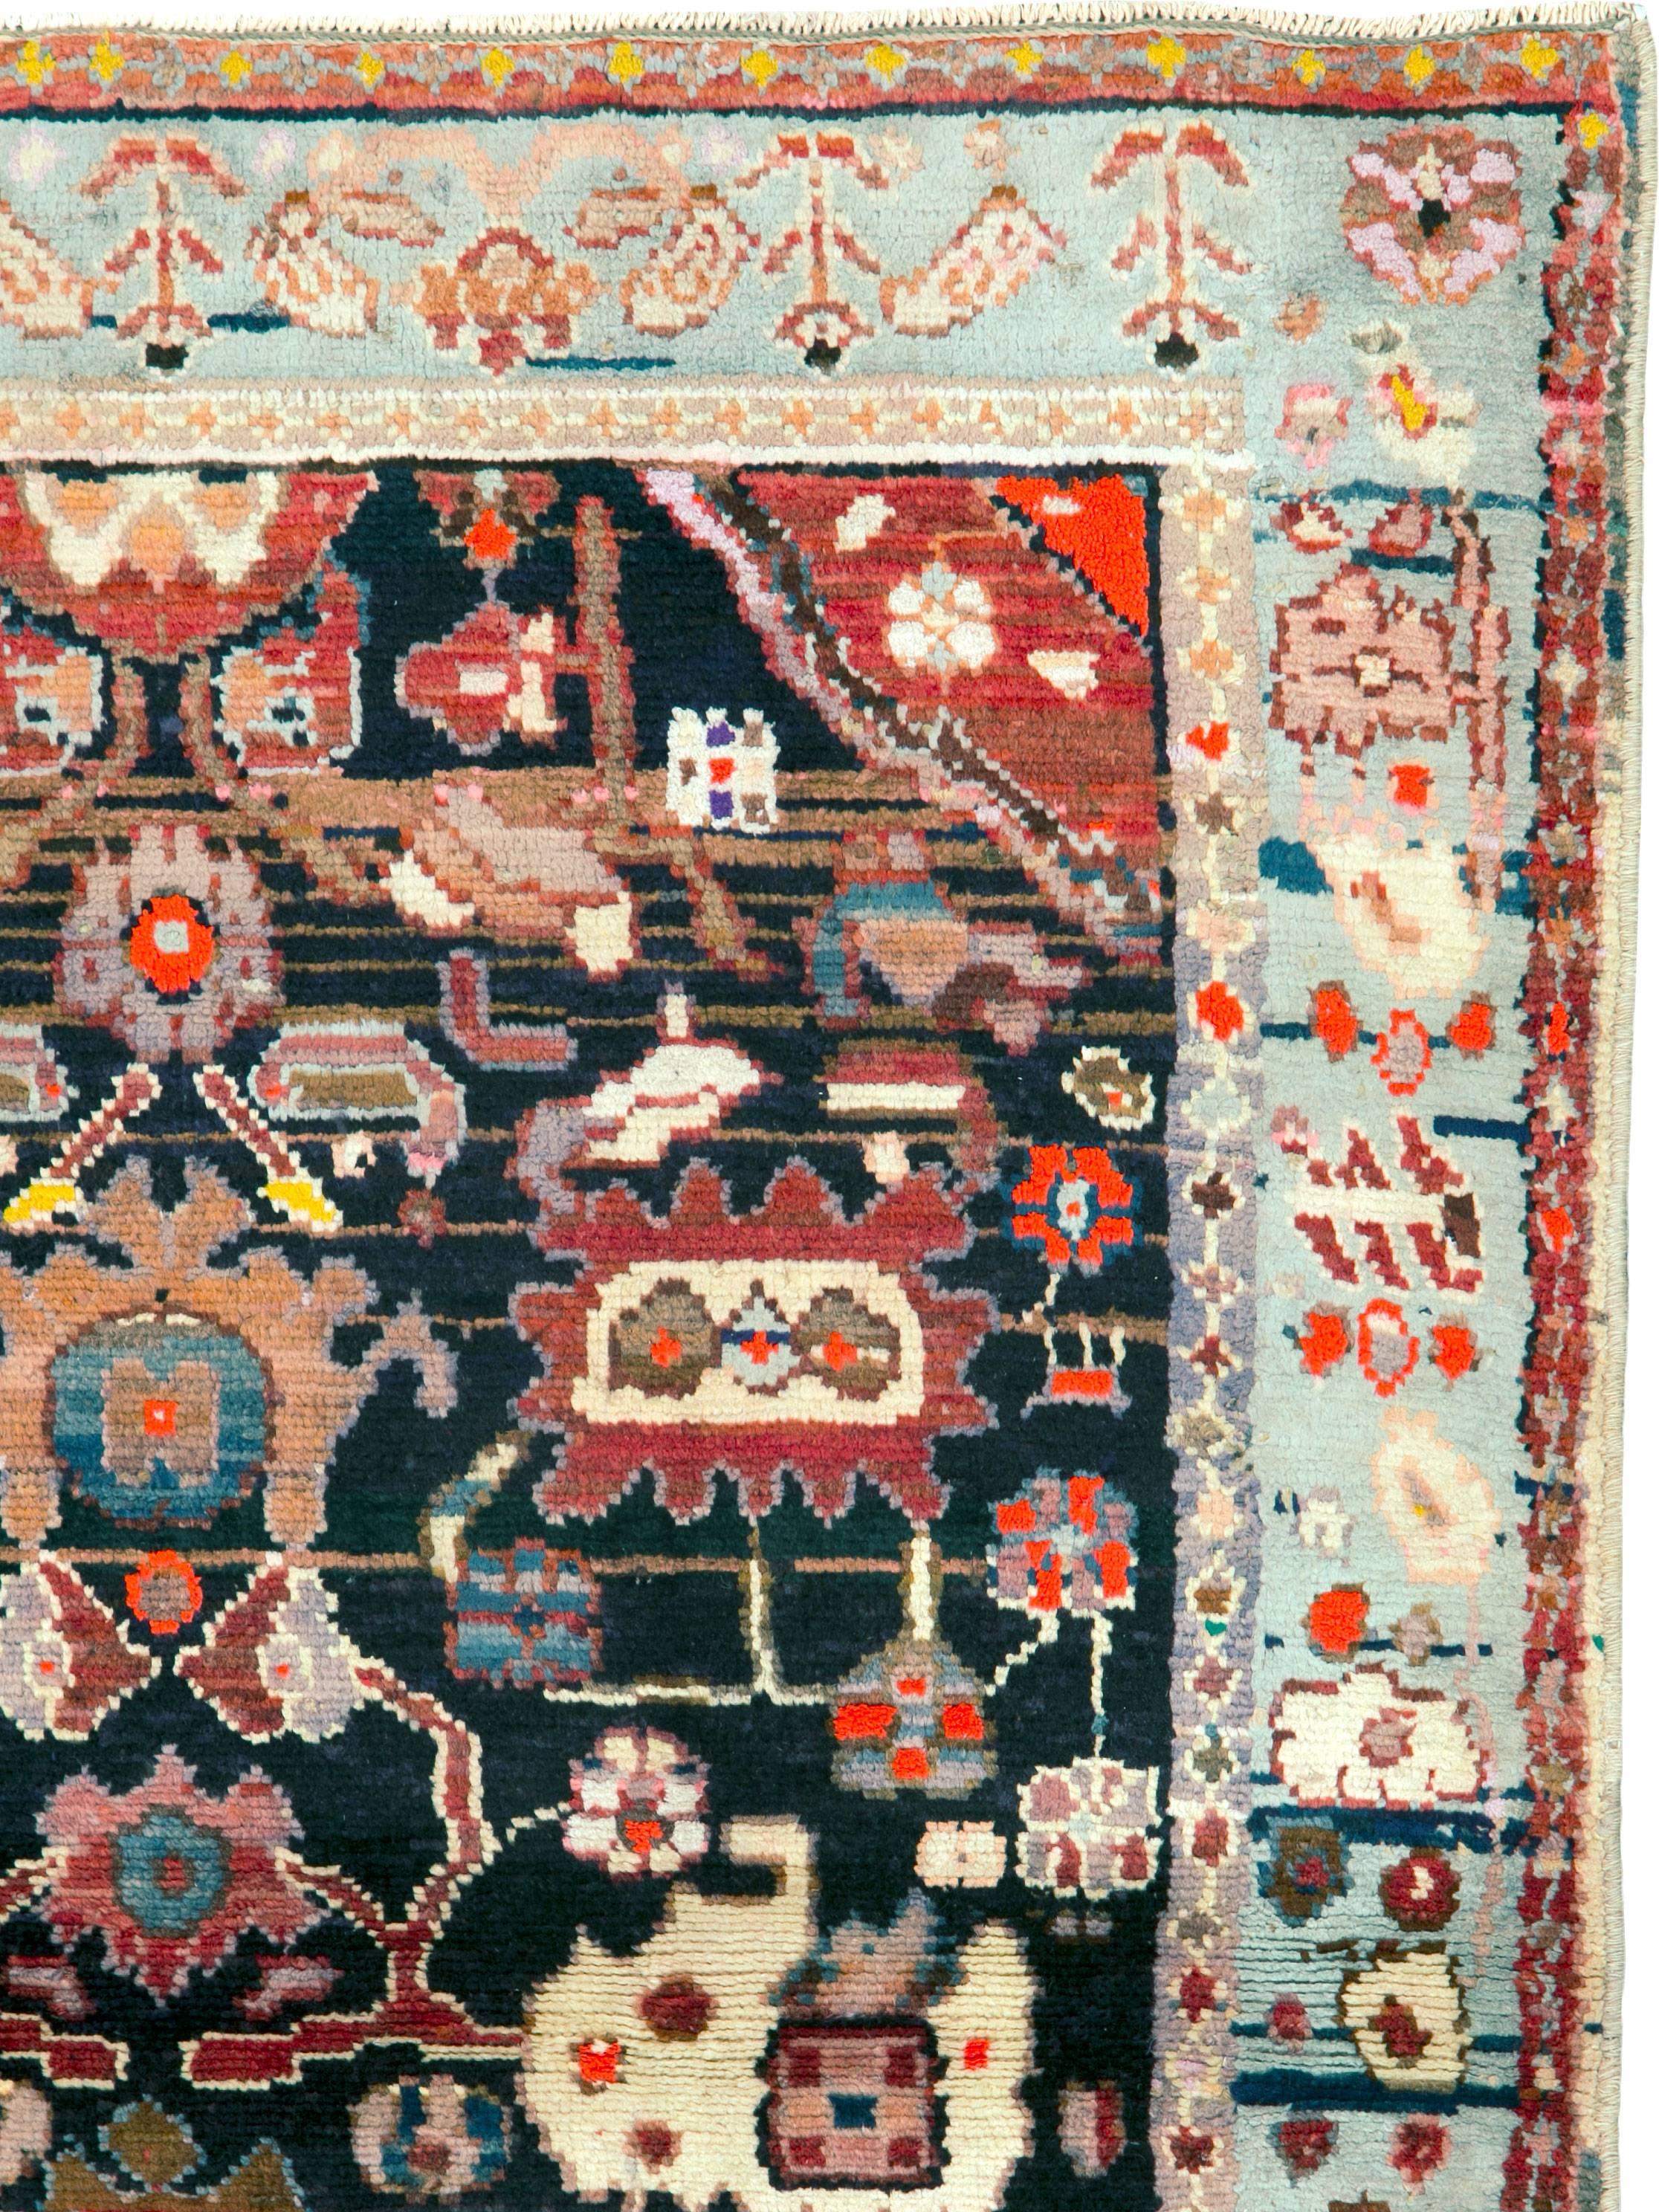 A vintage Persian Malayer rug from the mid-20th century.